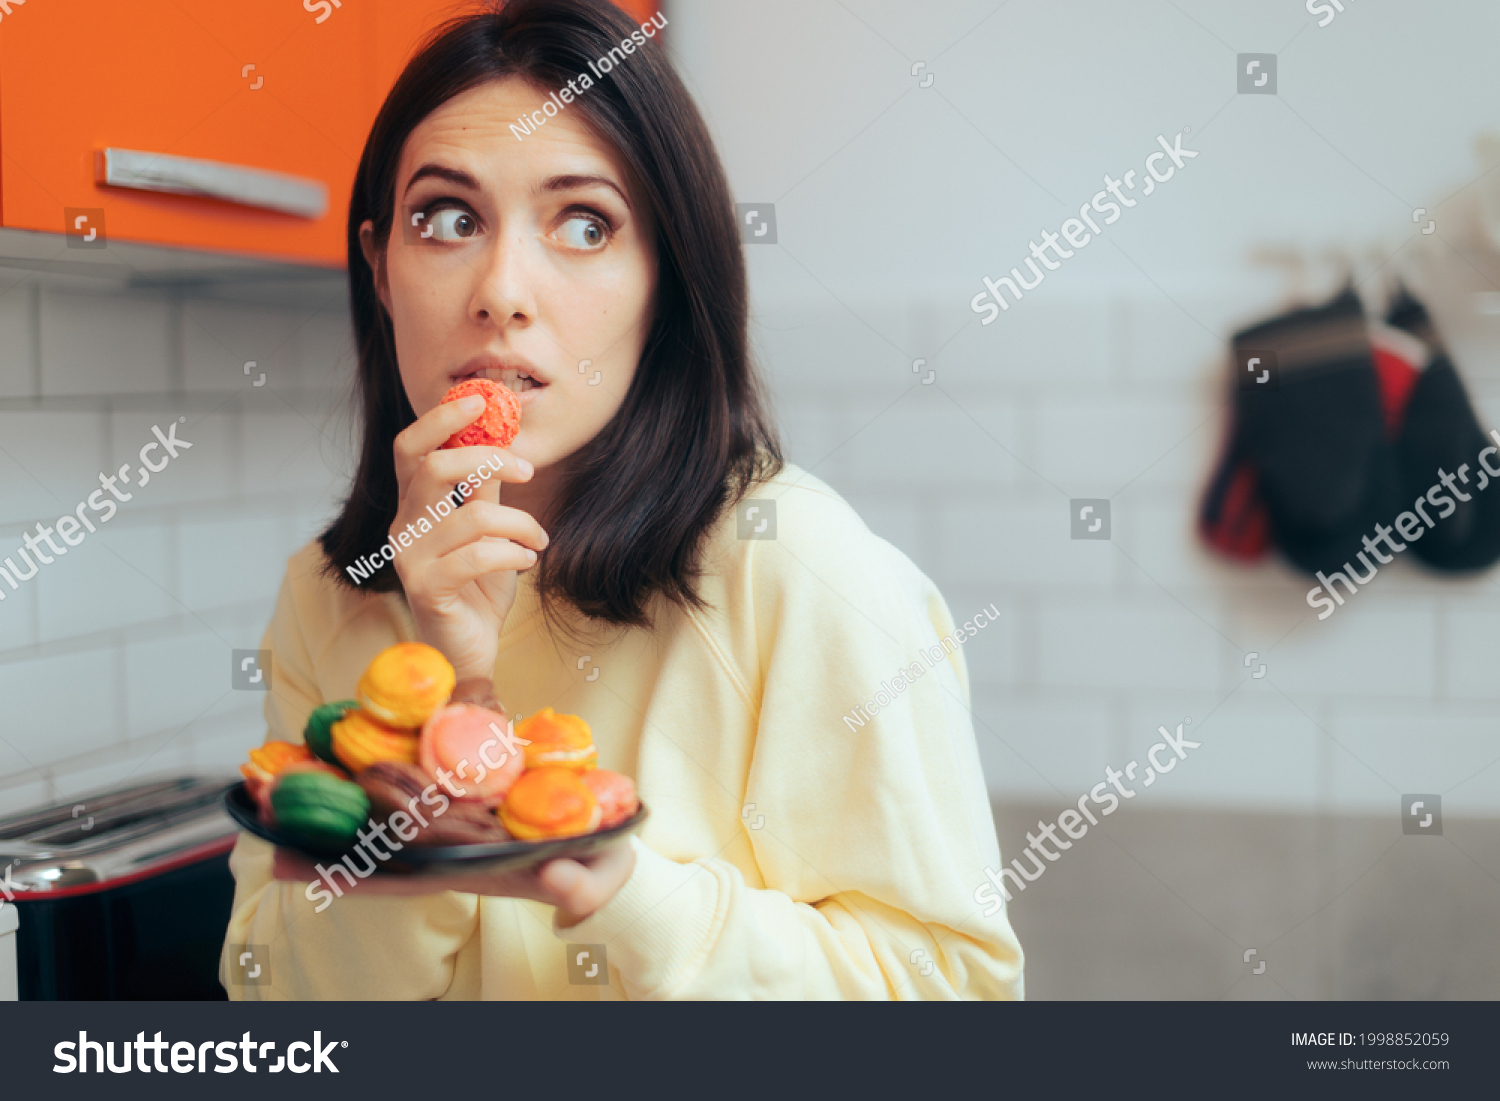 Woman Eating Macarons Feeling Guilty and Hiding. Adult person with sugar addiction hiding her alimentary habits over indulging because of stress
 #1998852059